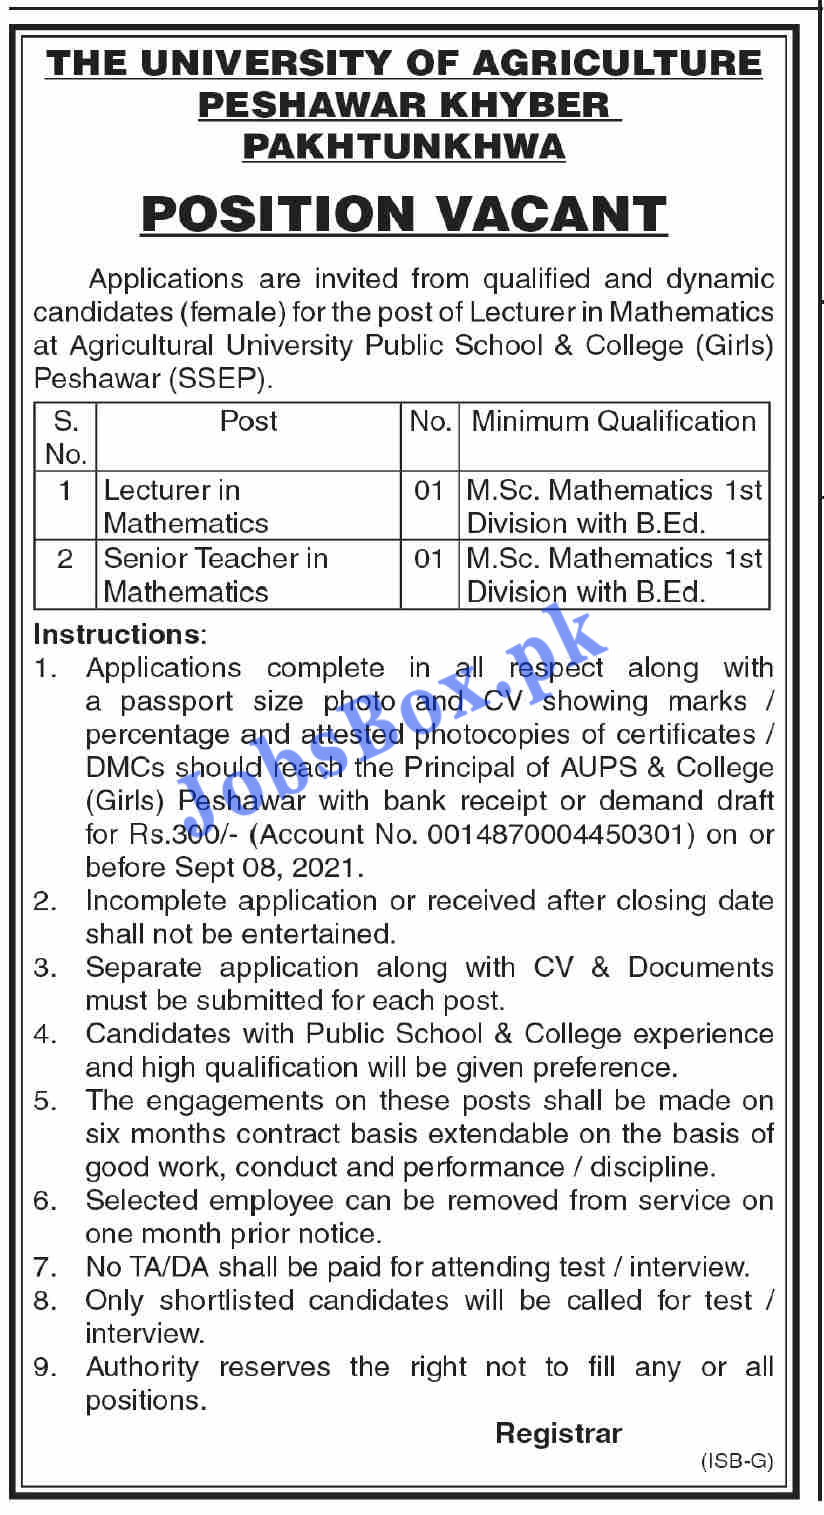 University of Agriculture Peshawar Jobs 2021 - Teaching Faculty Required